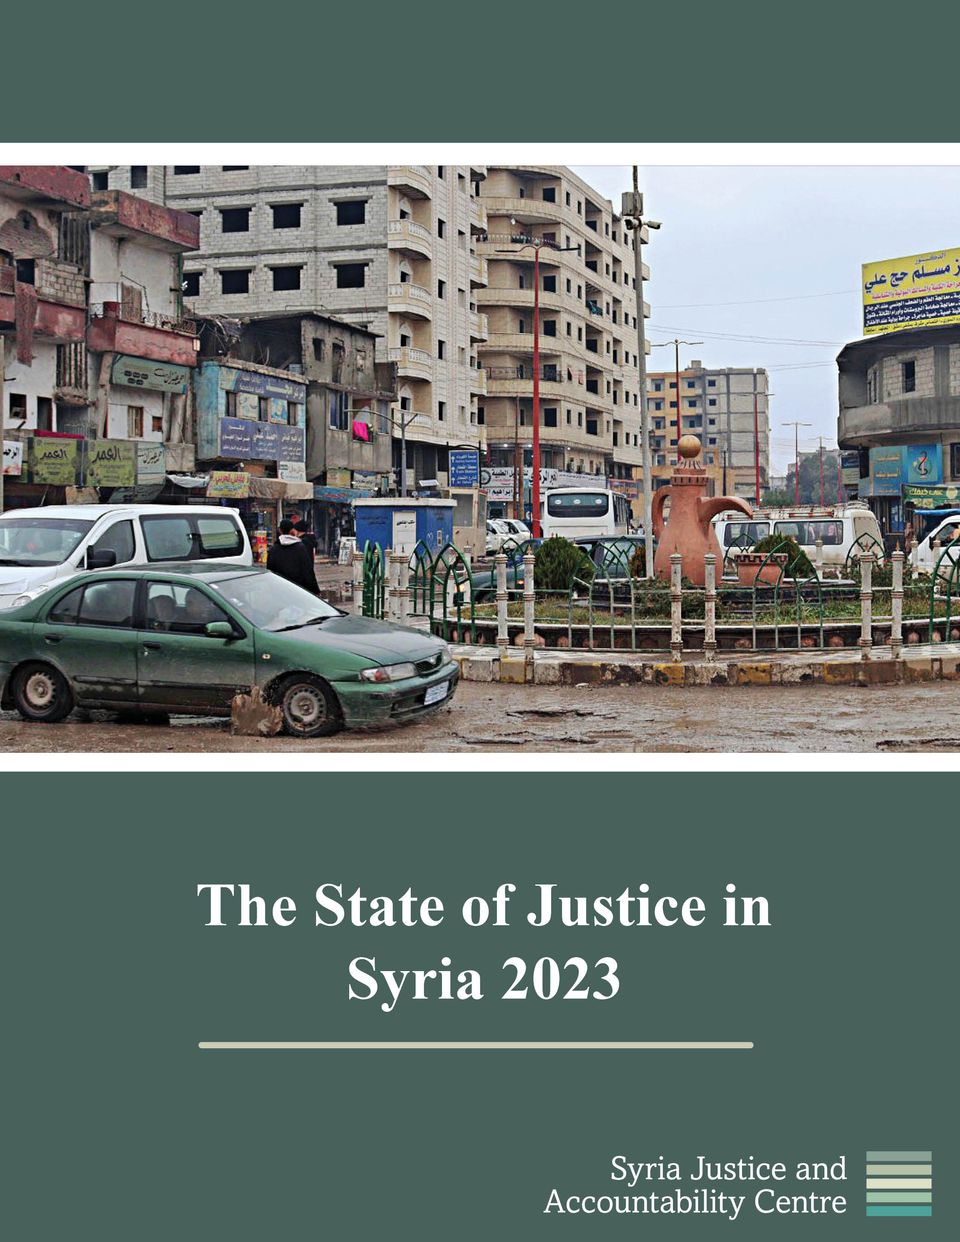 New Report: Twelve Years of conflict – The “State of Justice in Syria, 2023”